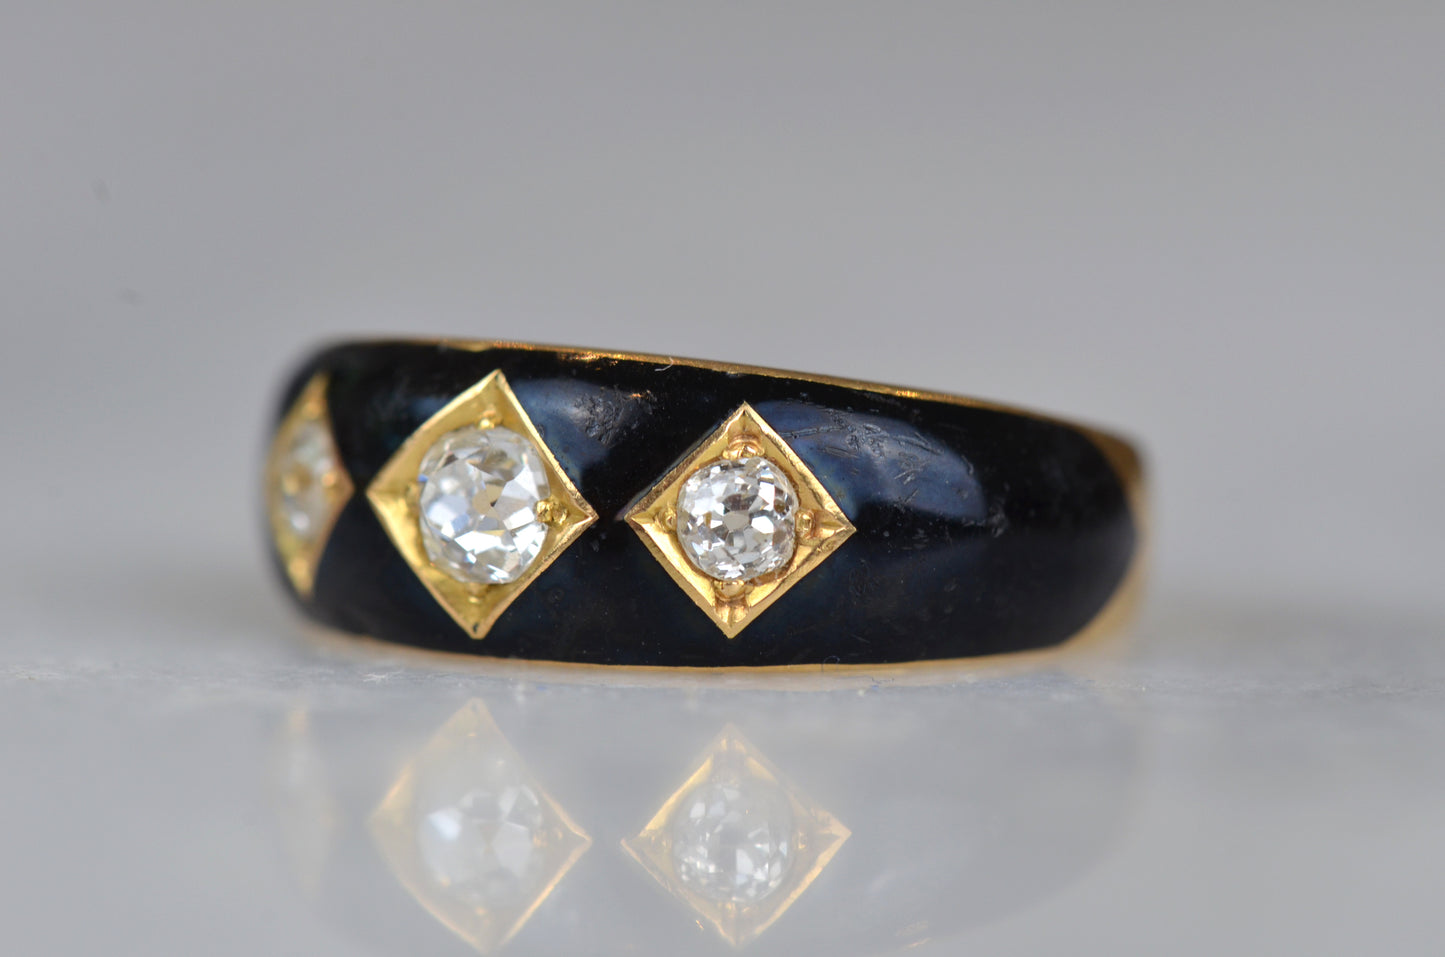 Compelling Victorian Enamel Trilogy Ring